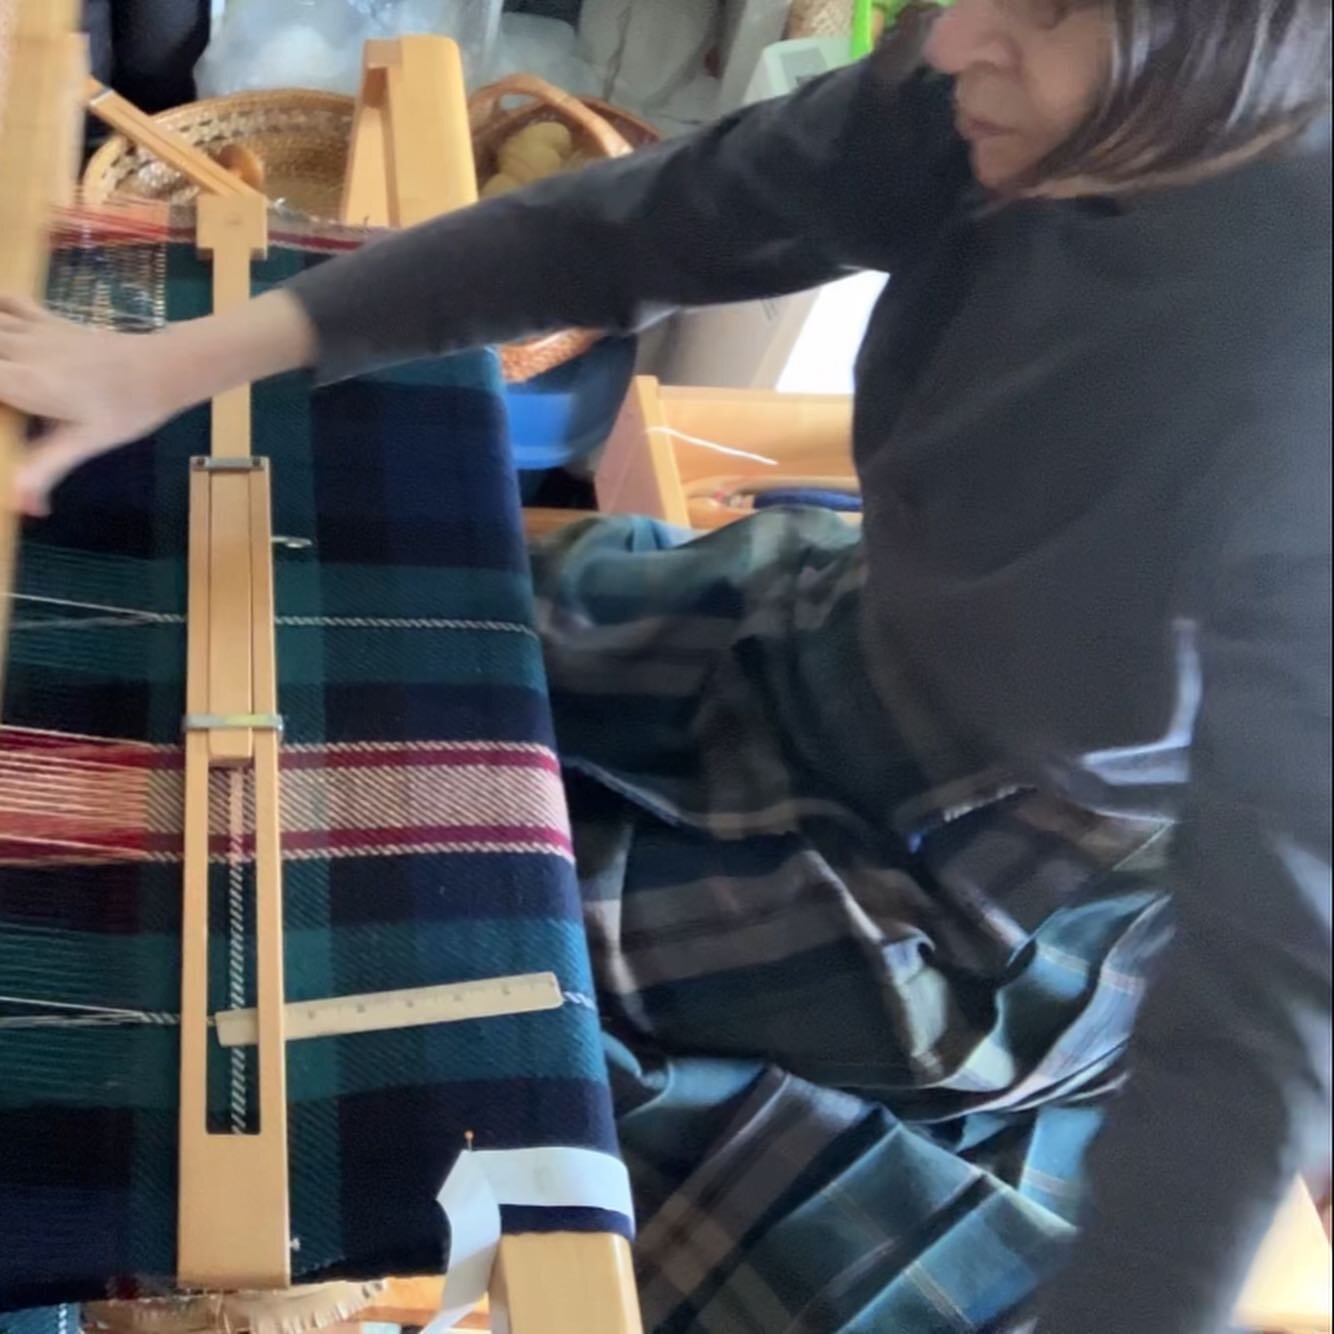 Weaving Tartan while Wearing Tartan

This commission combines three Tartans to create something new and filled with its own unique symbolism. Inspired by the Fraser, State of Minnesota and State of Maine Tartans, the customer created a narrative abou